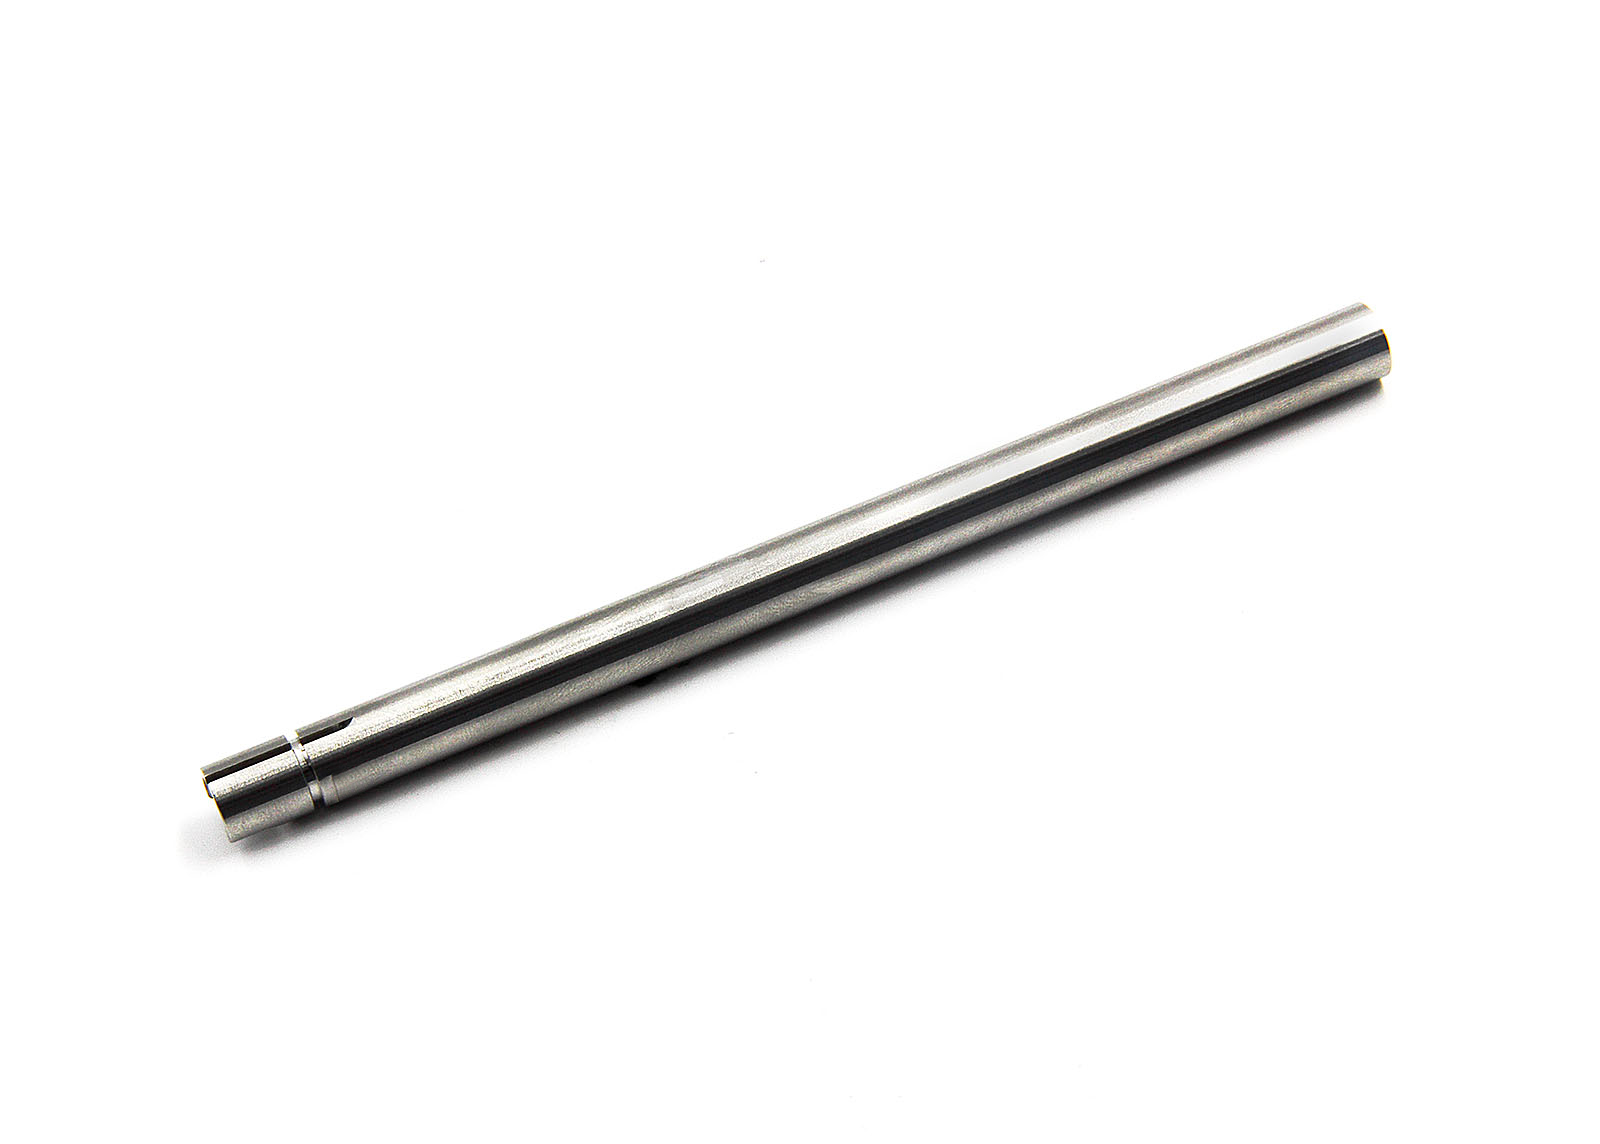 Stainless Steel 6.03mm Precision GBB Inner Barrel 133mm - Modify Airsfot Parts